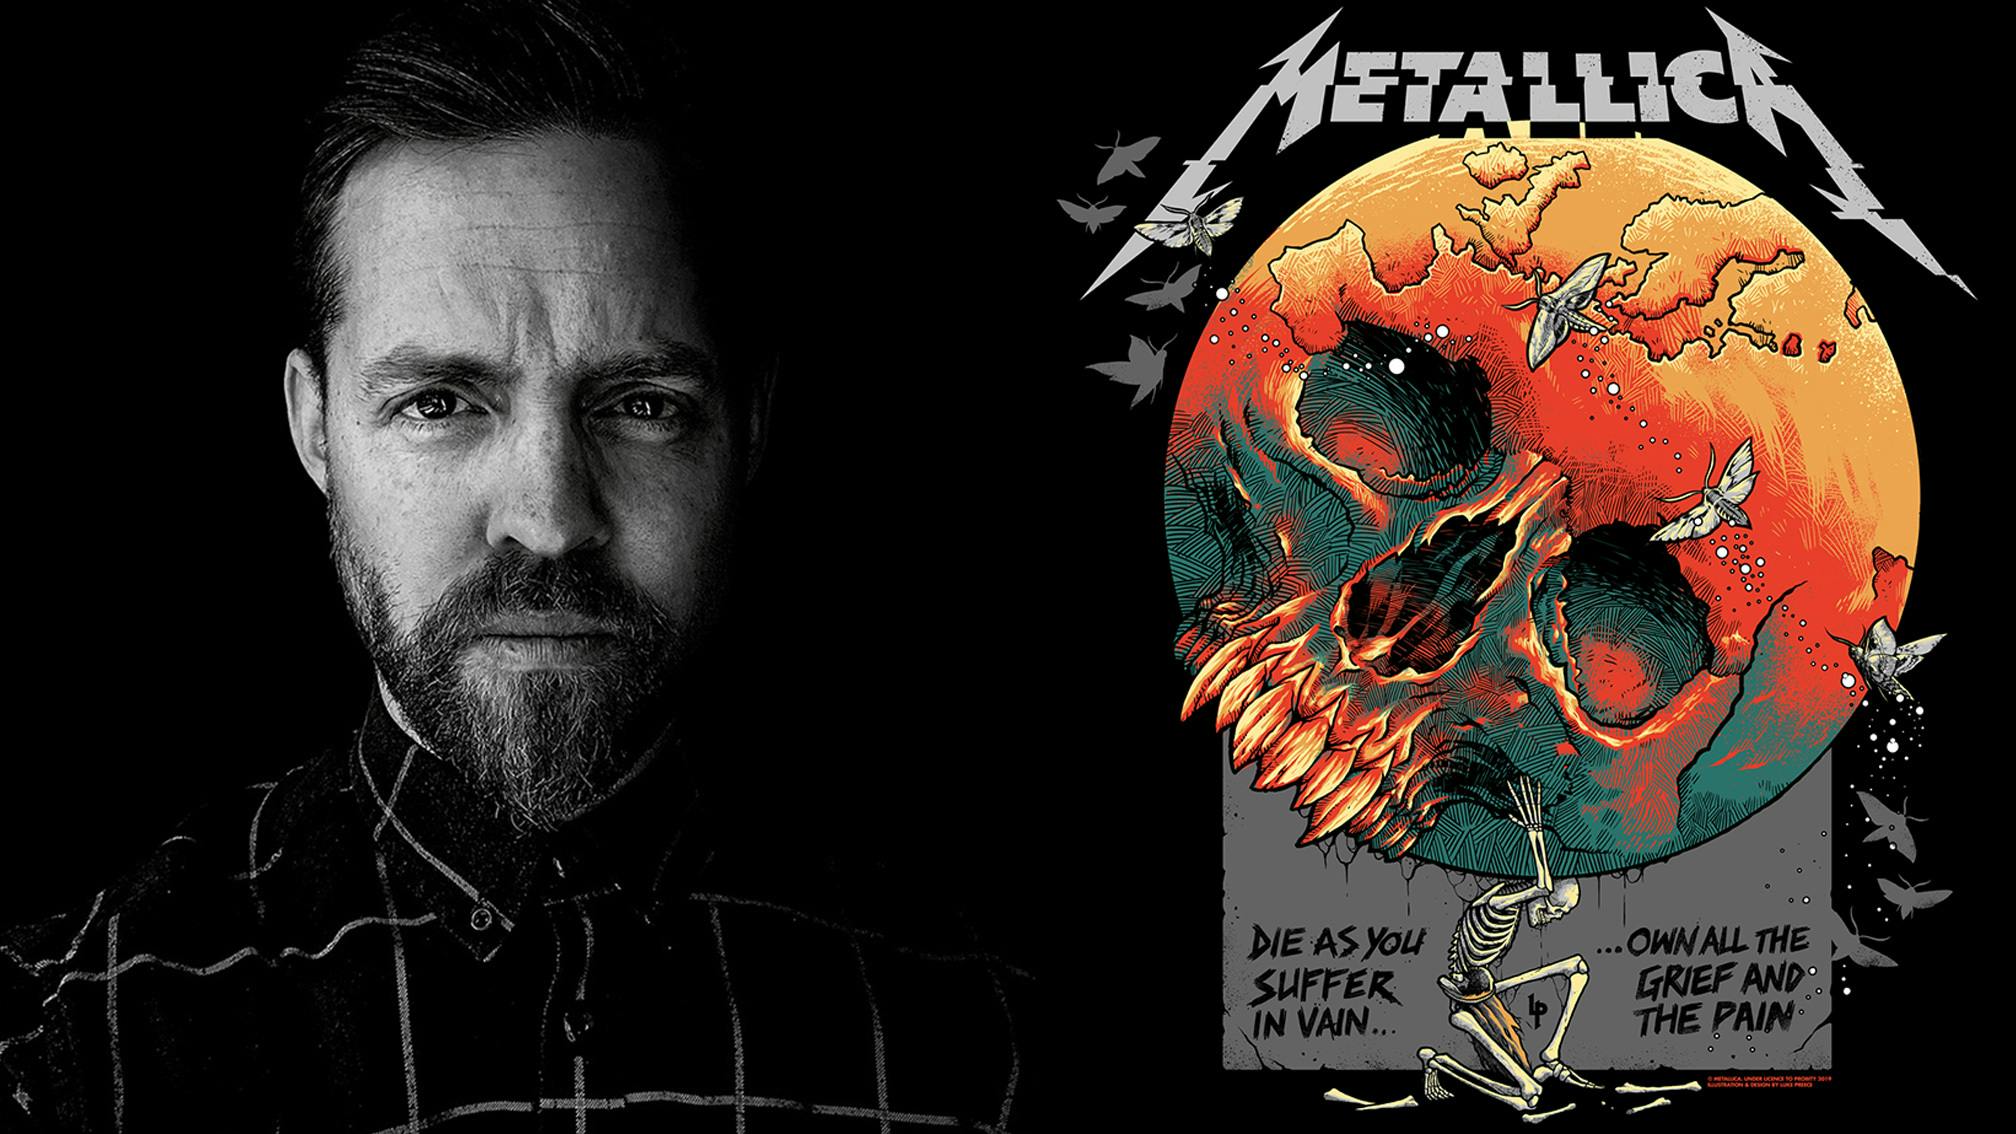 Illustrator Luke Preece: “So much of what I do is influenced by metal”